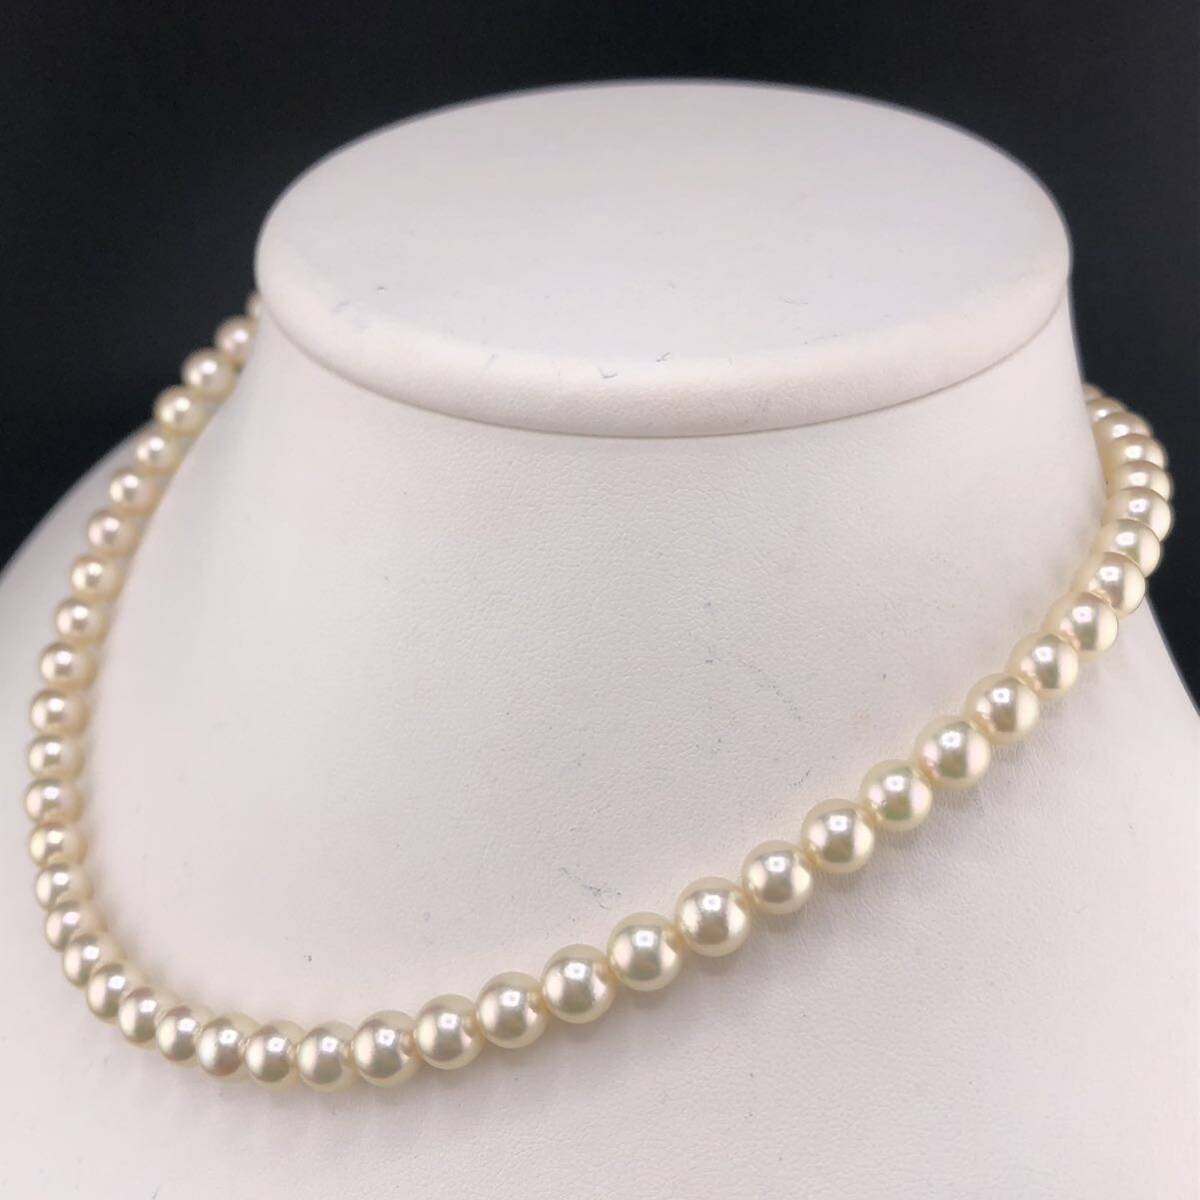 E04-7675 アコヤパールネックレス 6.5mm 40cm 29.3g ( アコヤ真珠 Pearl necklace SILVER )の画像2